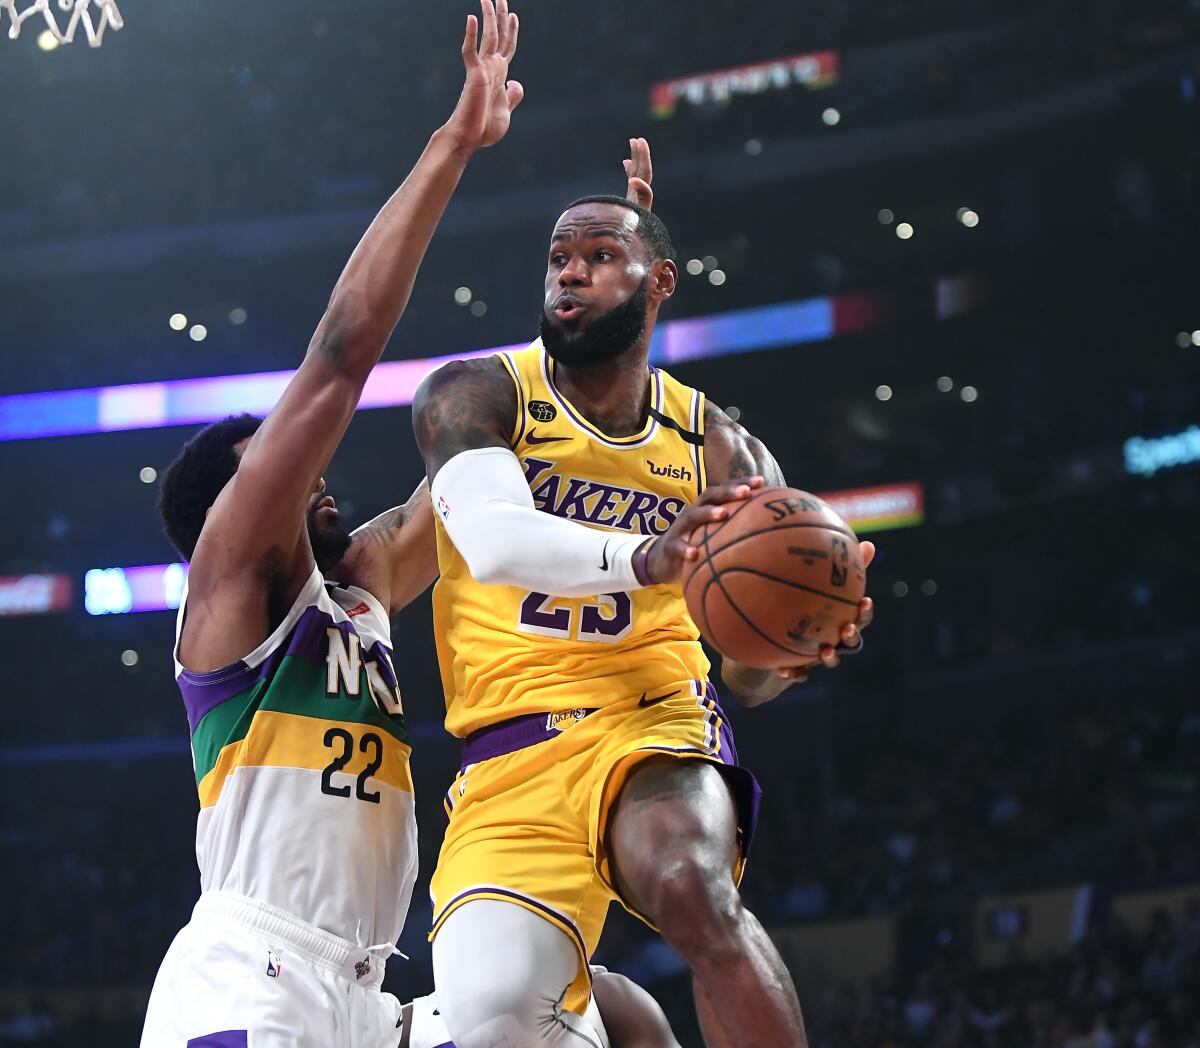 Lakers forward LeBron James drives past Pelicans forward Derrick Favors before making a pass during the first quarter of a game Feb. 25, 2020, at Staples Center.